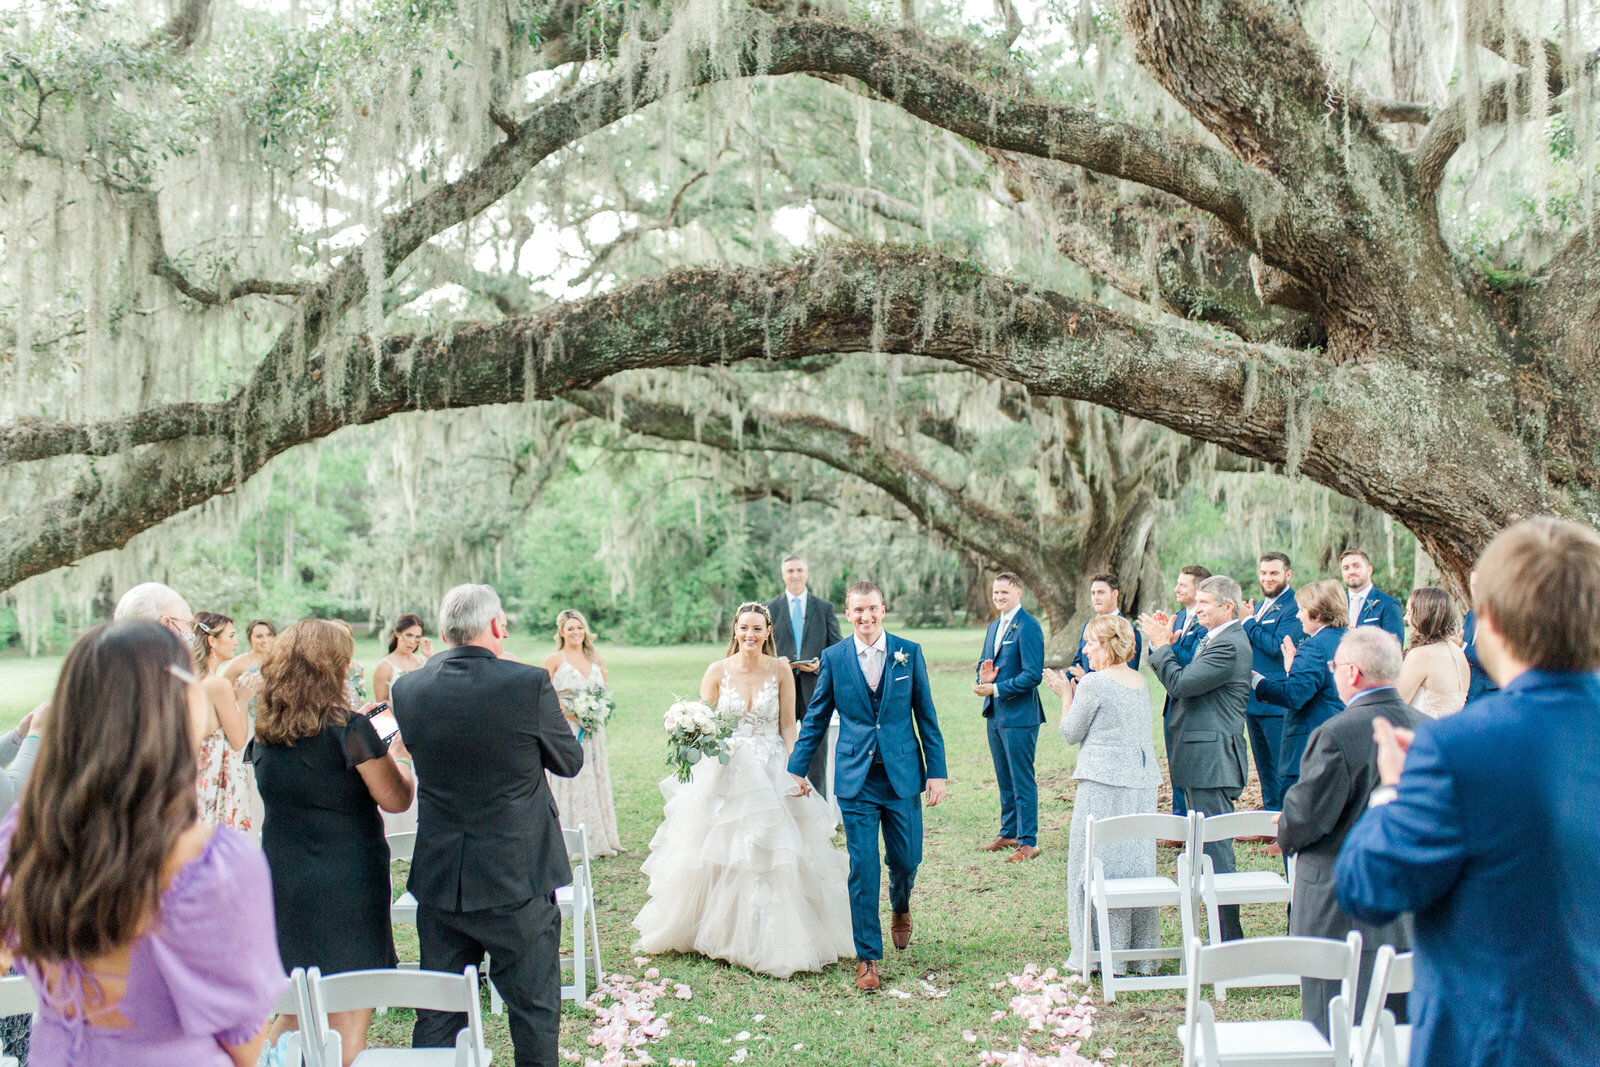 Bride and groom walk down aisle as family applauds at Magnolia Plantation and Gardens.